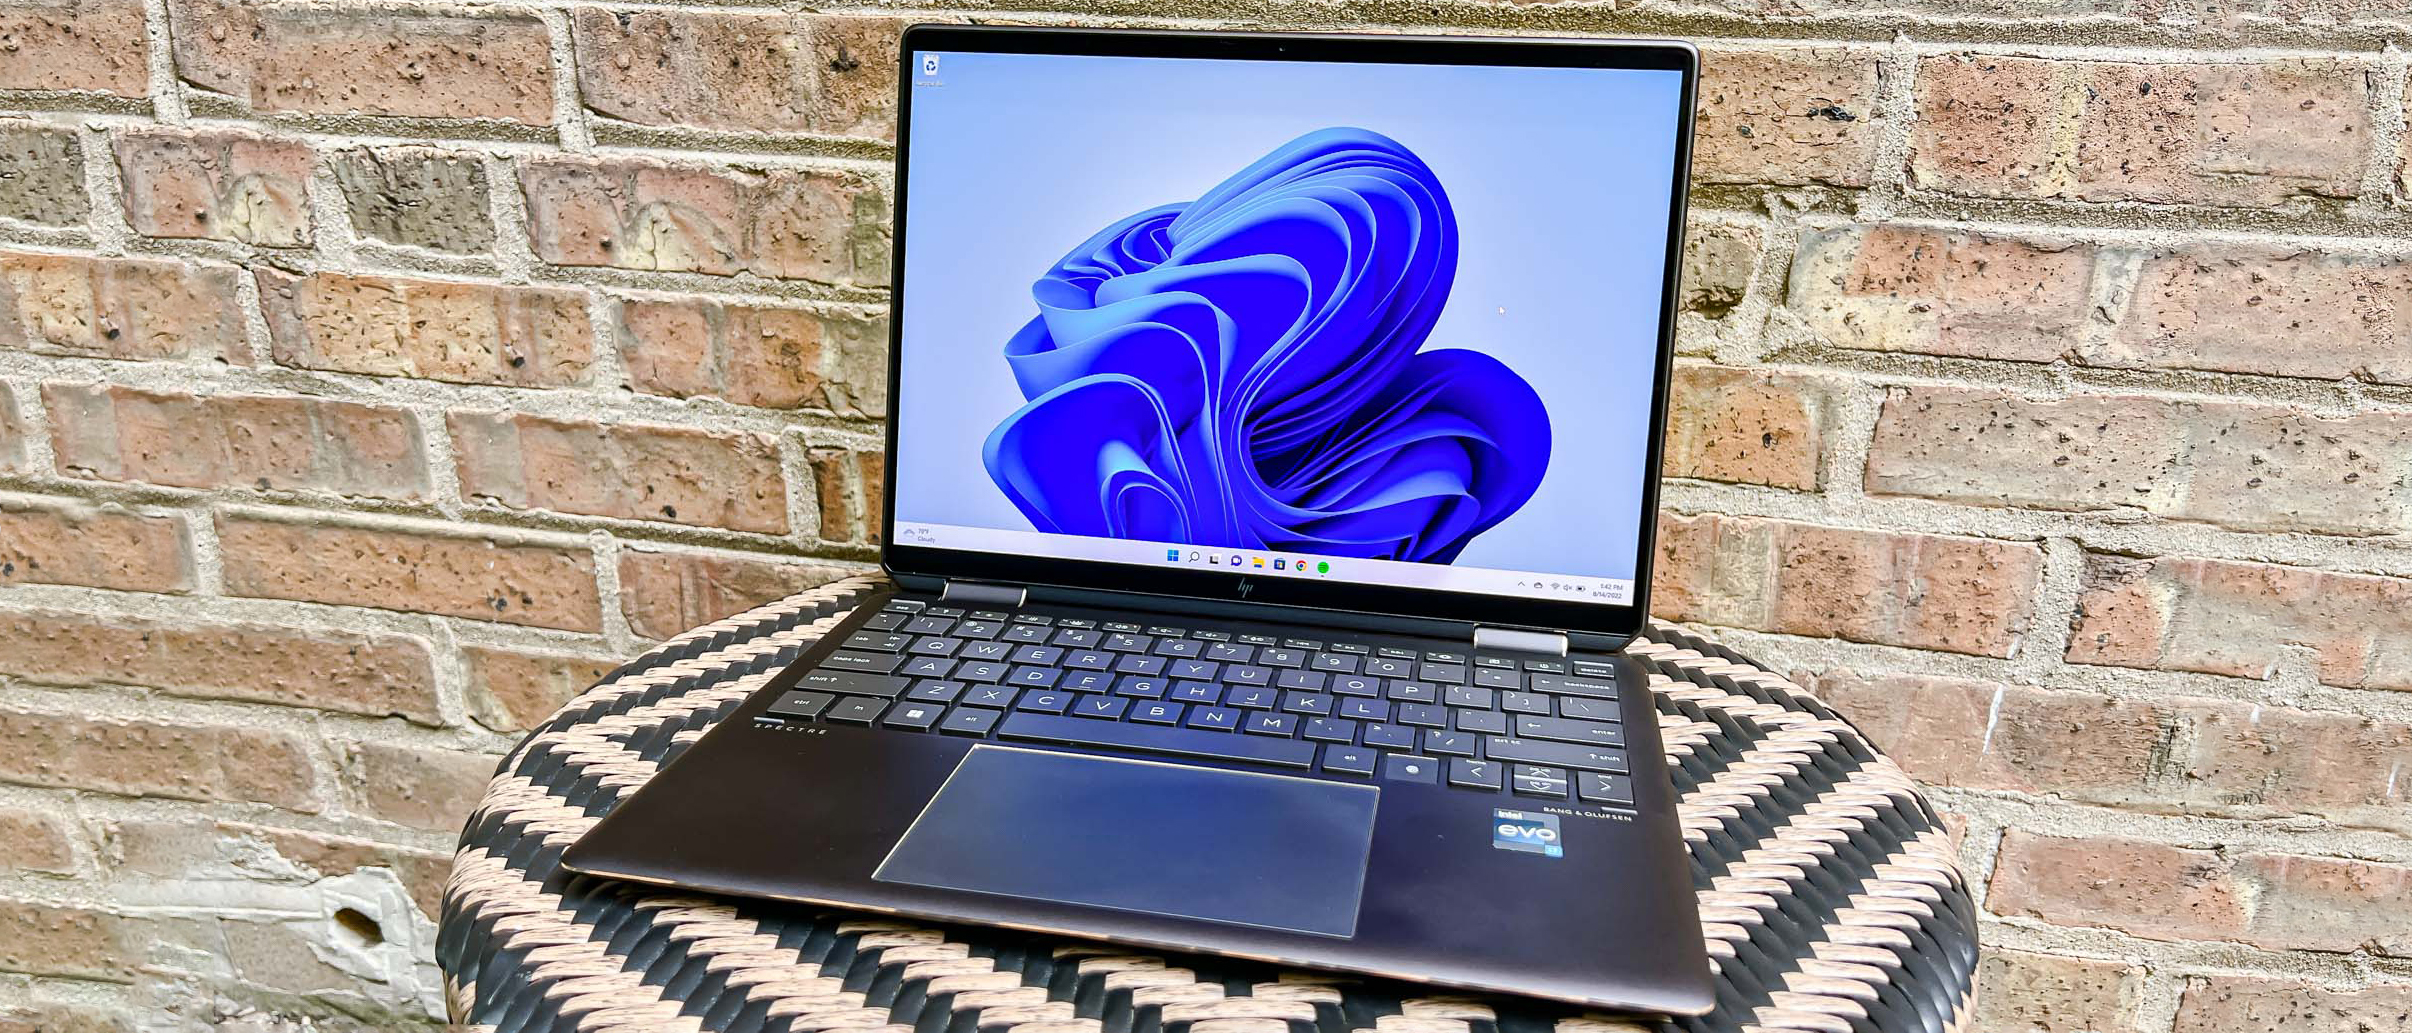 HP Spectre X360 16 (2022) Review - The Best 2-in-1 Laptop? 